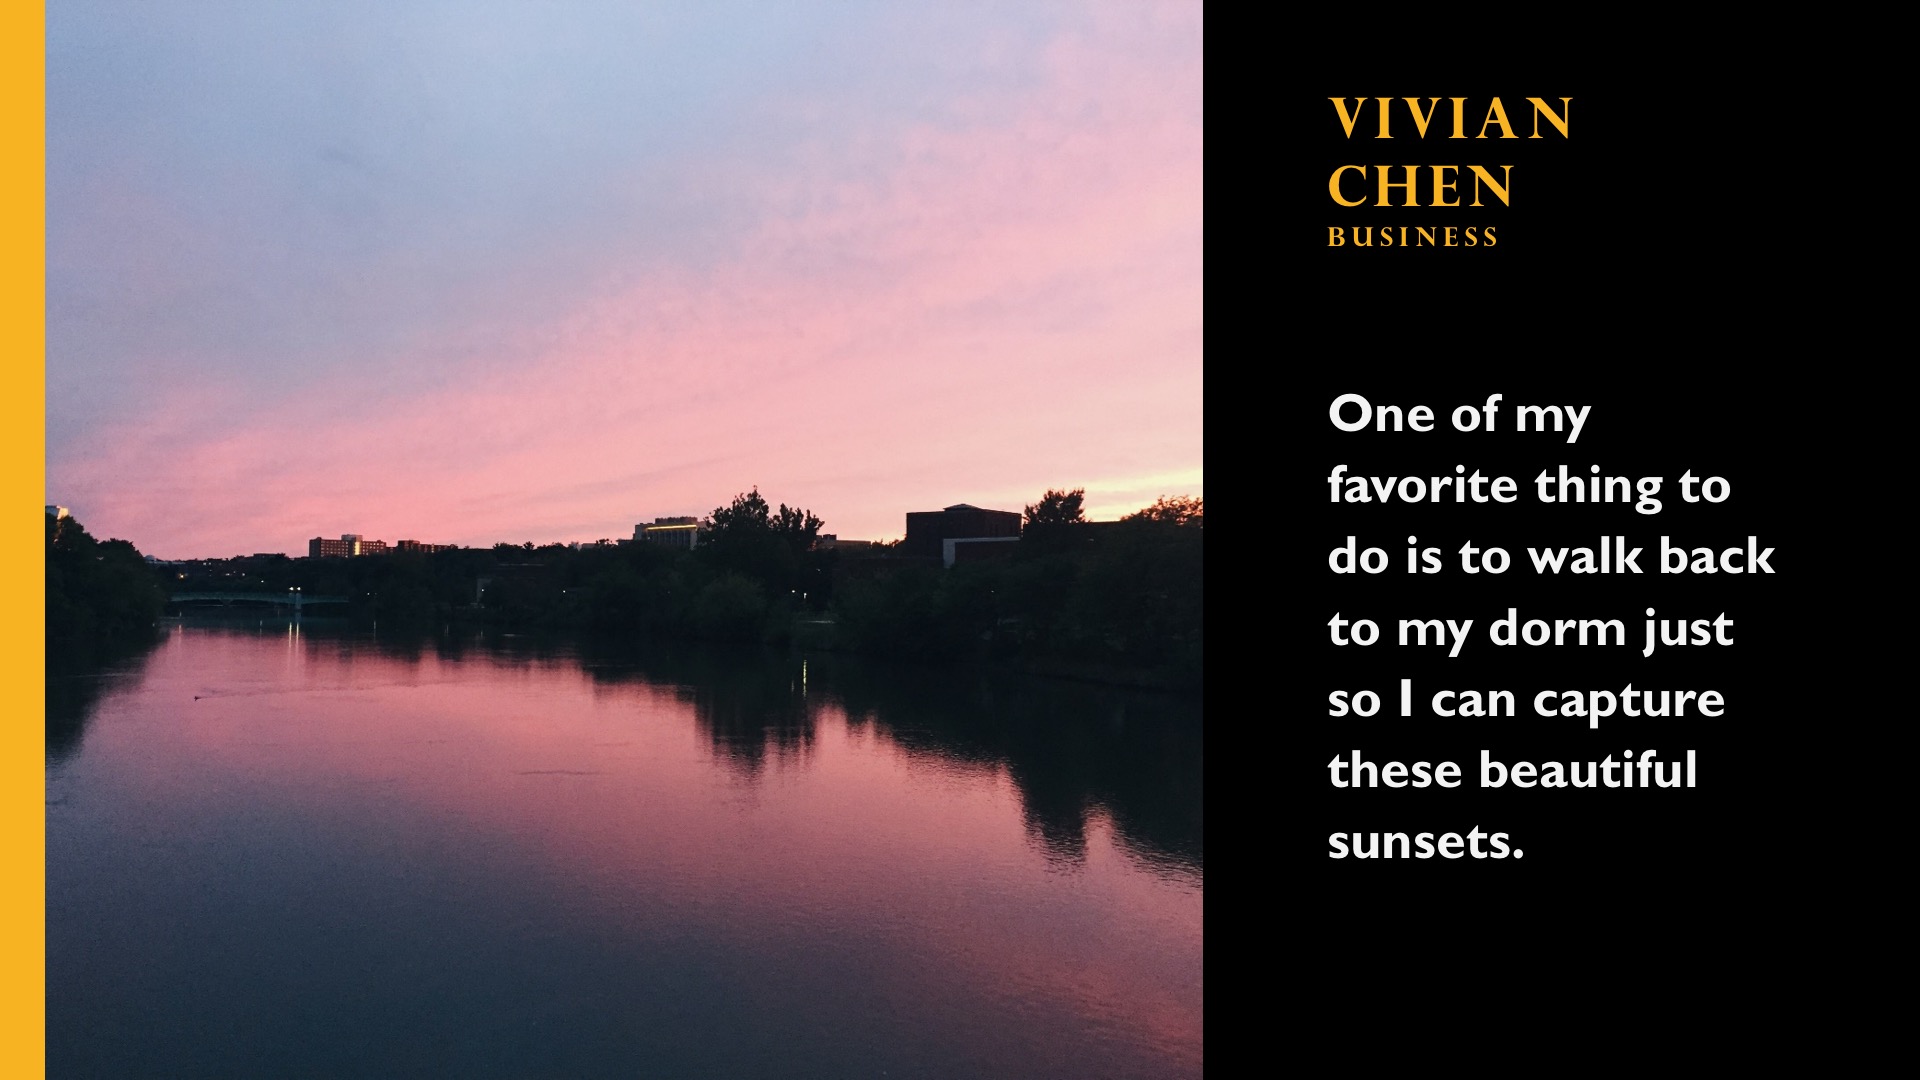 Vivian Chen. Business. One of my favorite thing to do is to walk back to my dorm just so I can capture these beautiful sunsets